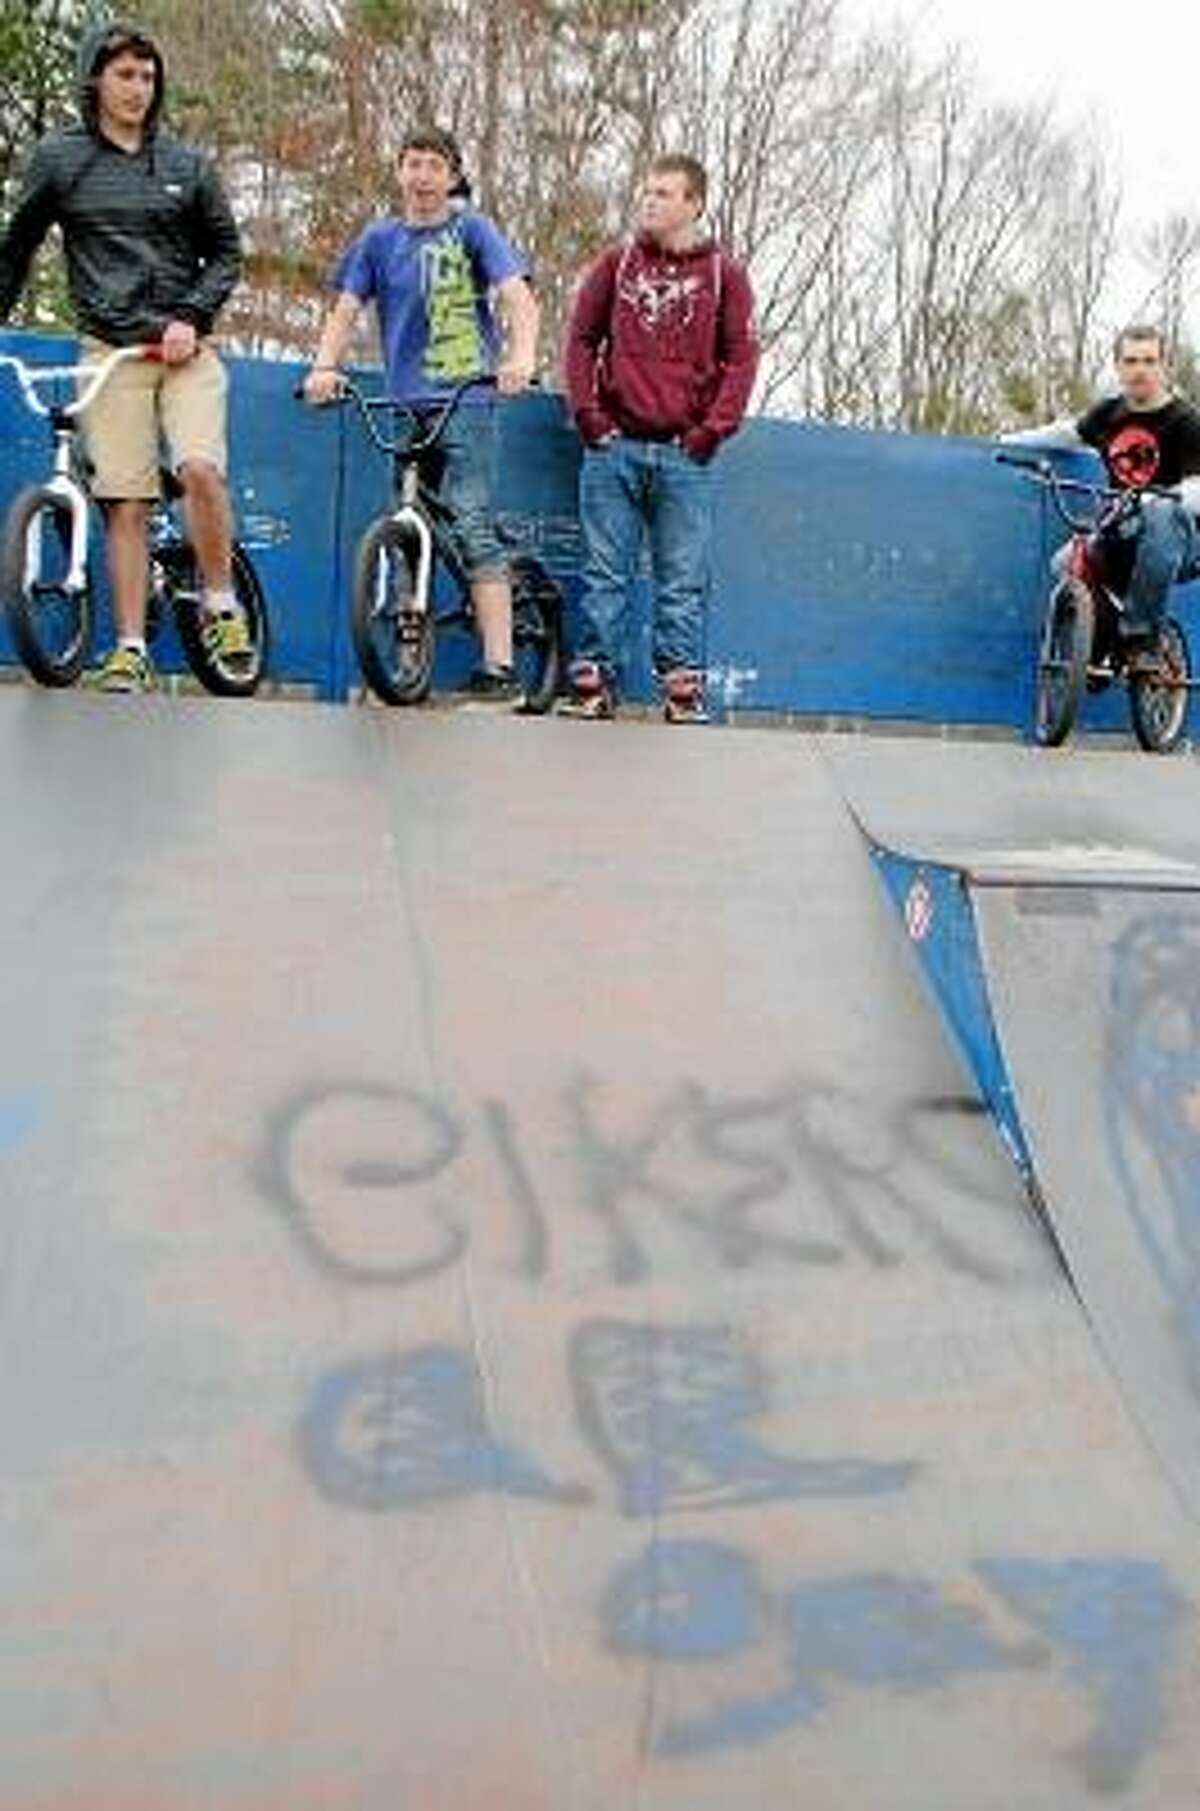 Jessica Glenza / Register Citizen -- Torrington skate park was marred with racist and homophobic graffiti, park users say on Tuesday.